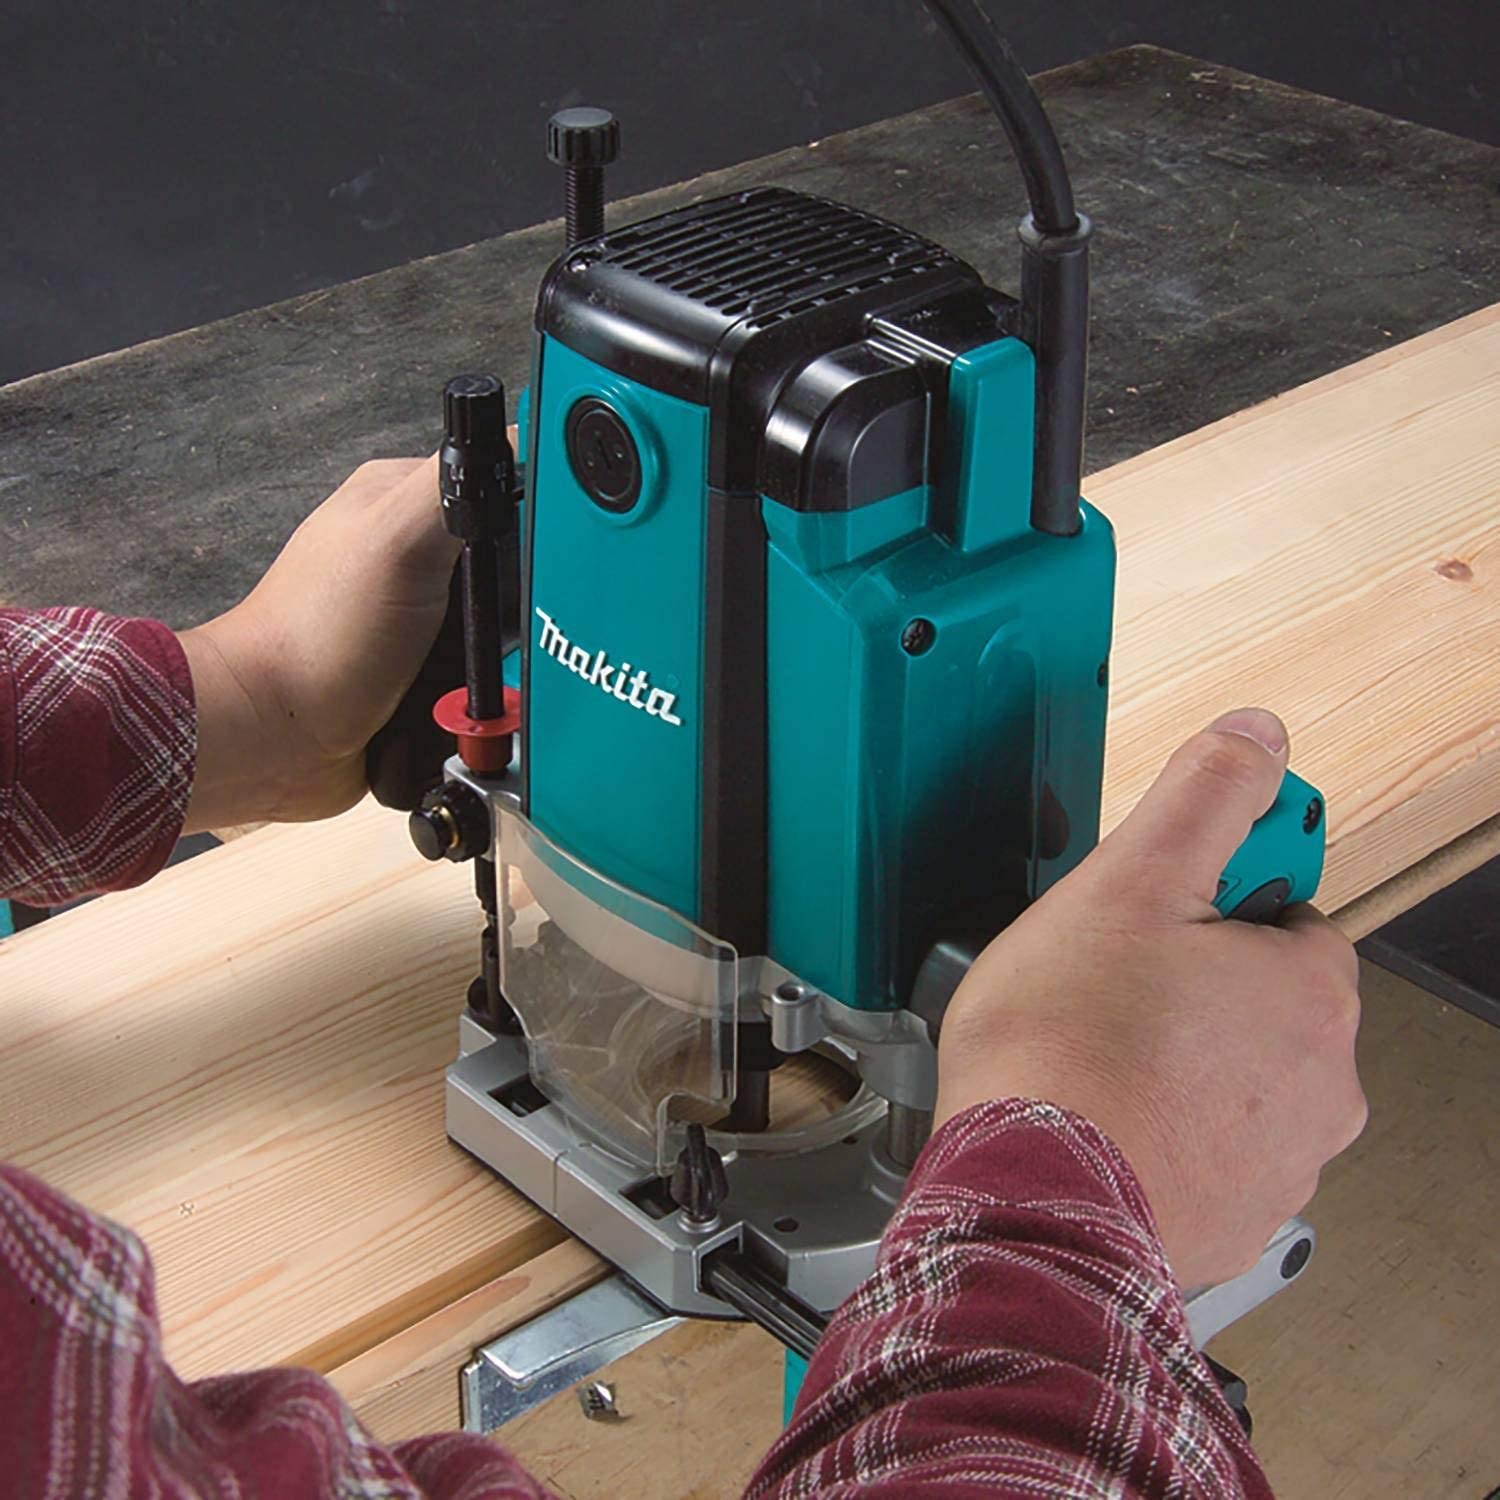 Makita 12.7mm Plunge Router RP1800X Power Tool Services